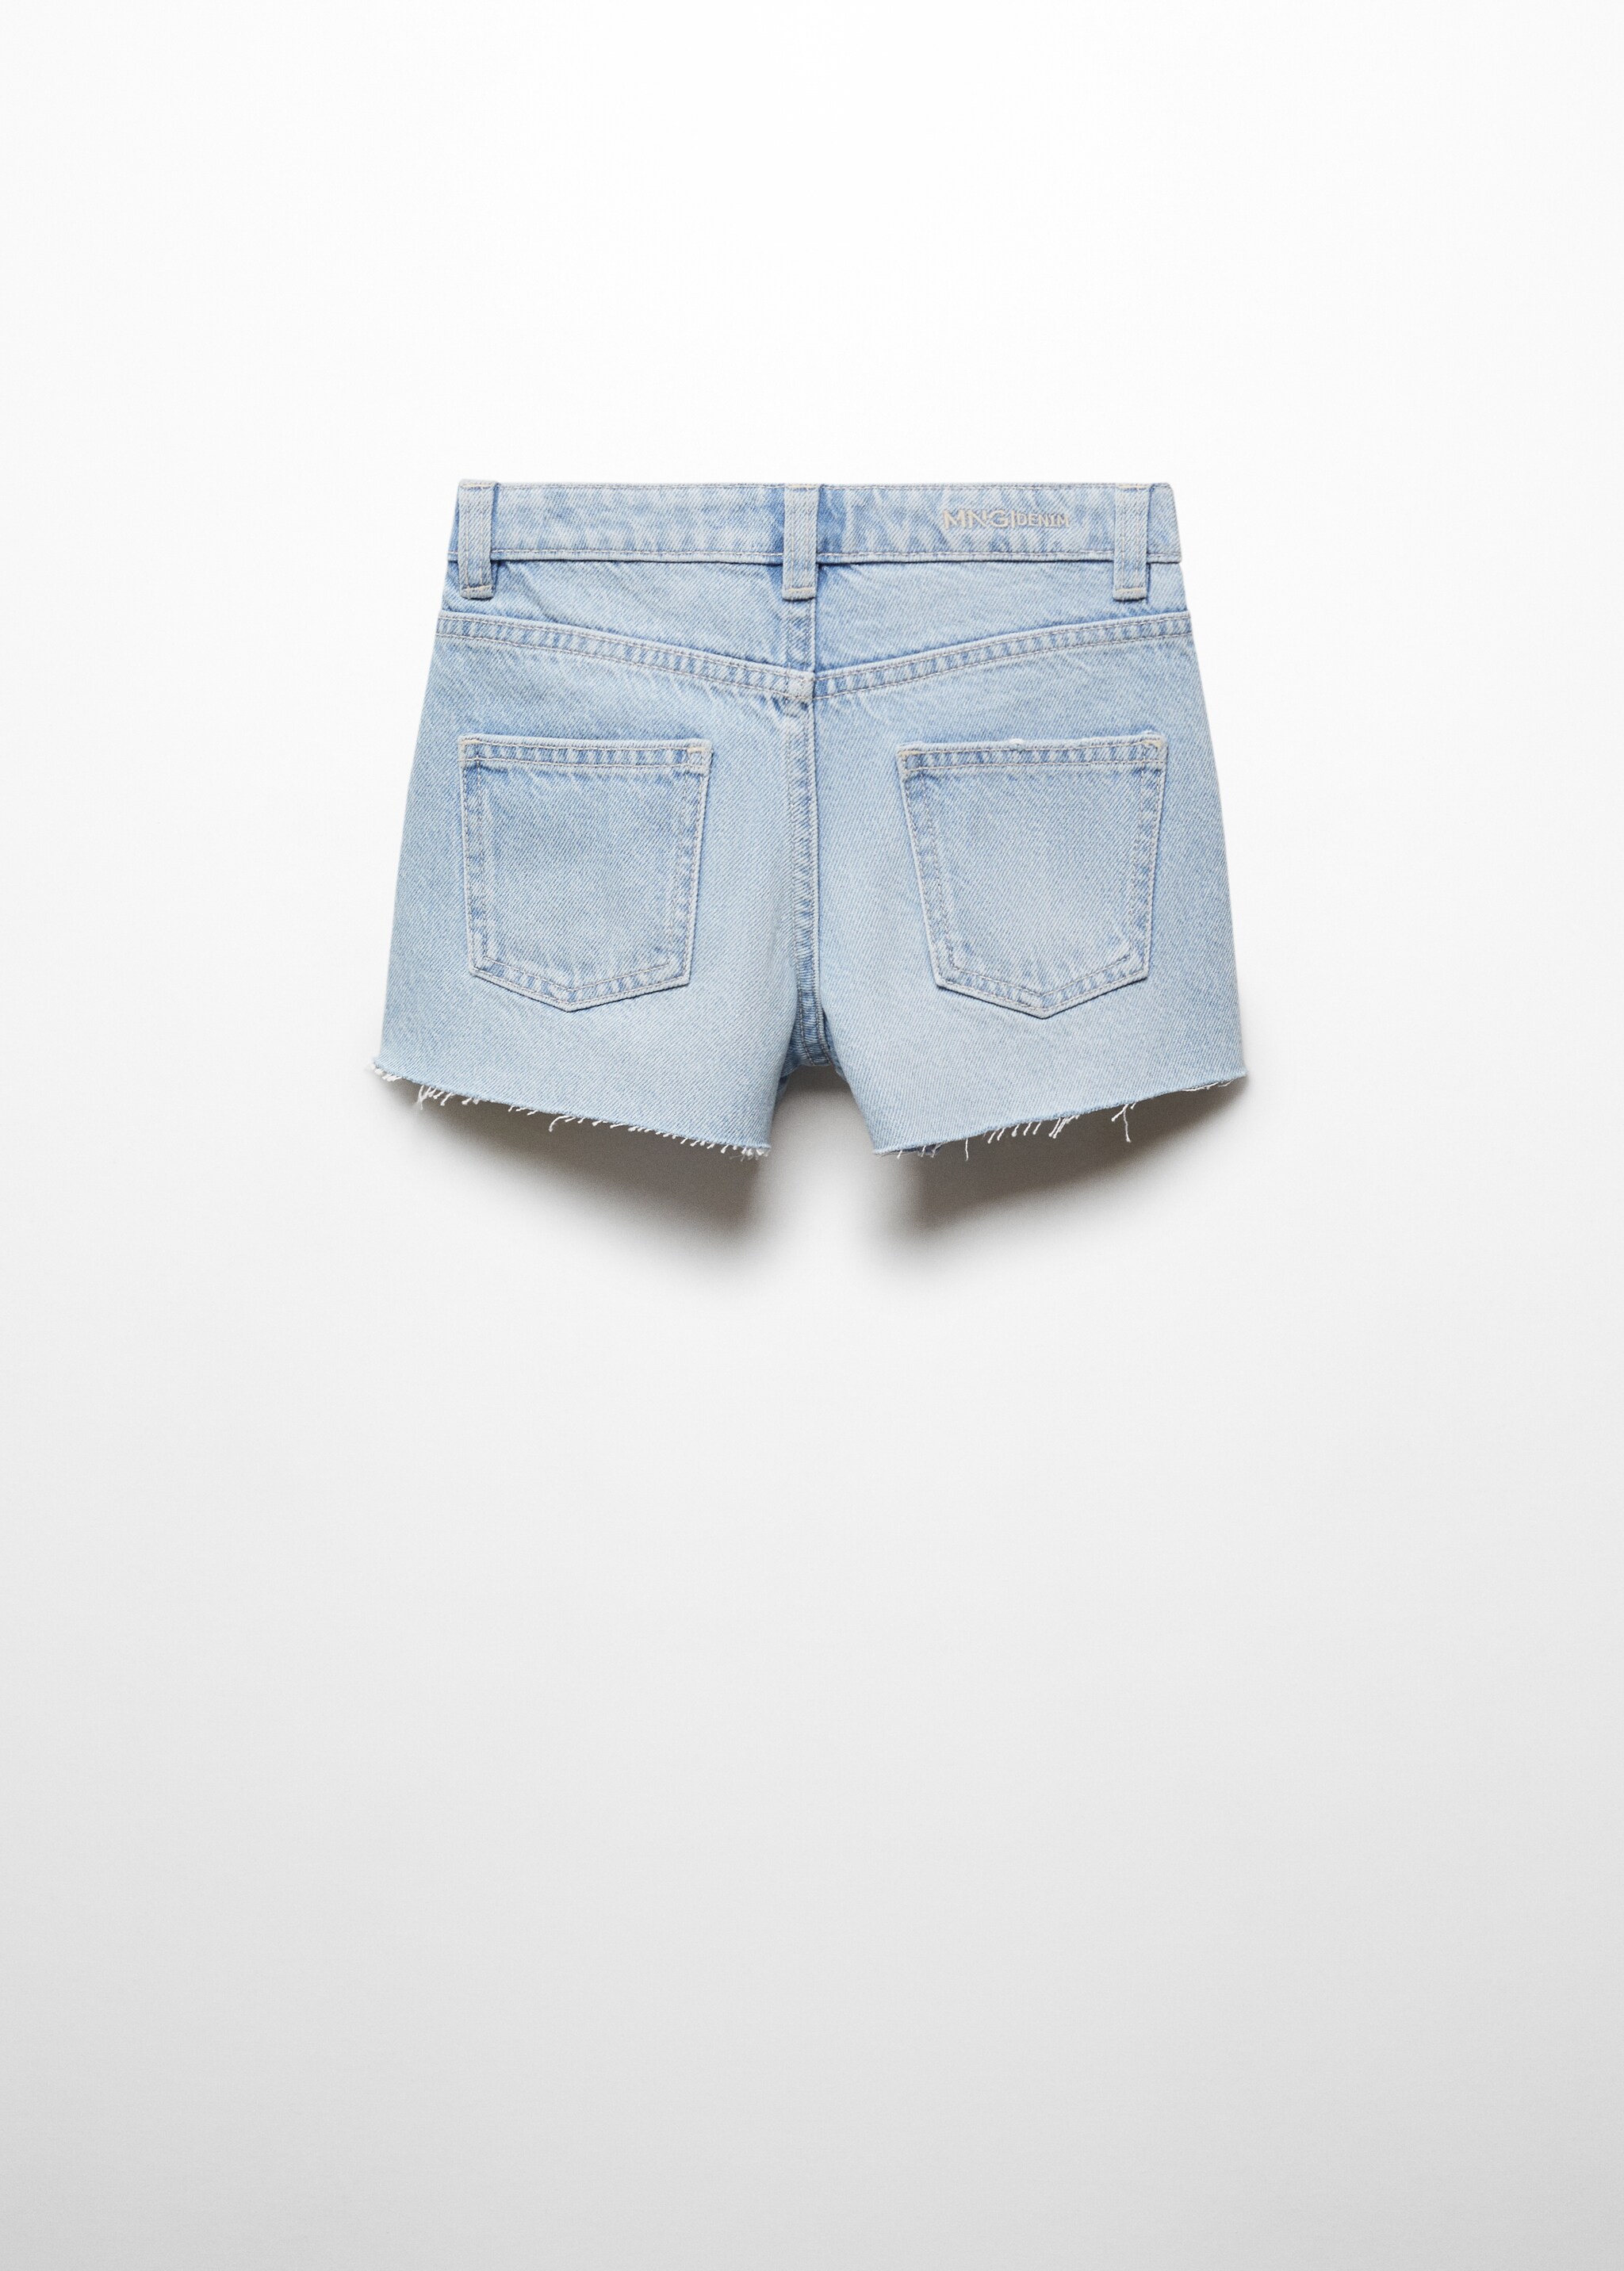 Decorative ripped denim shorts - Reverse of the article